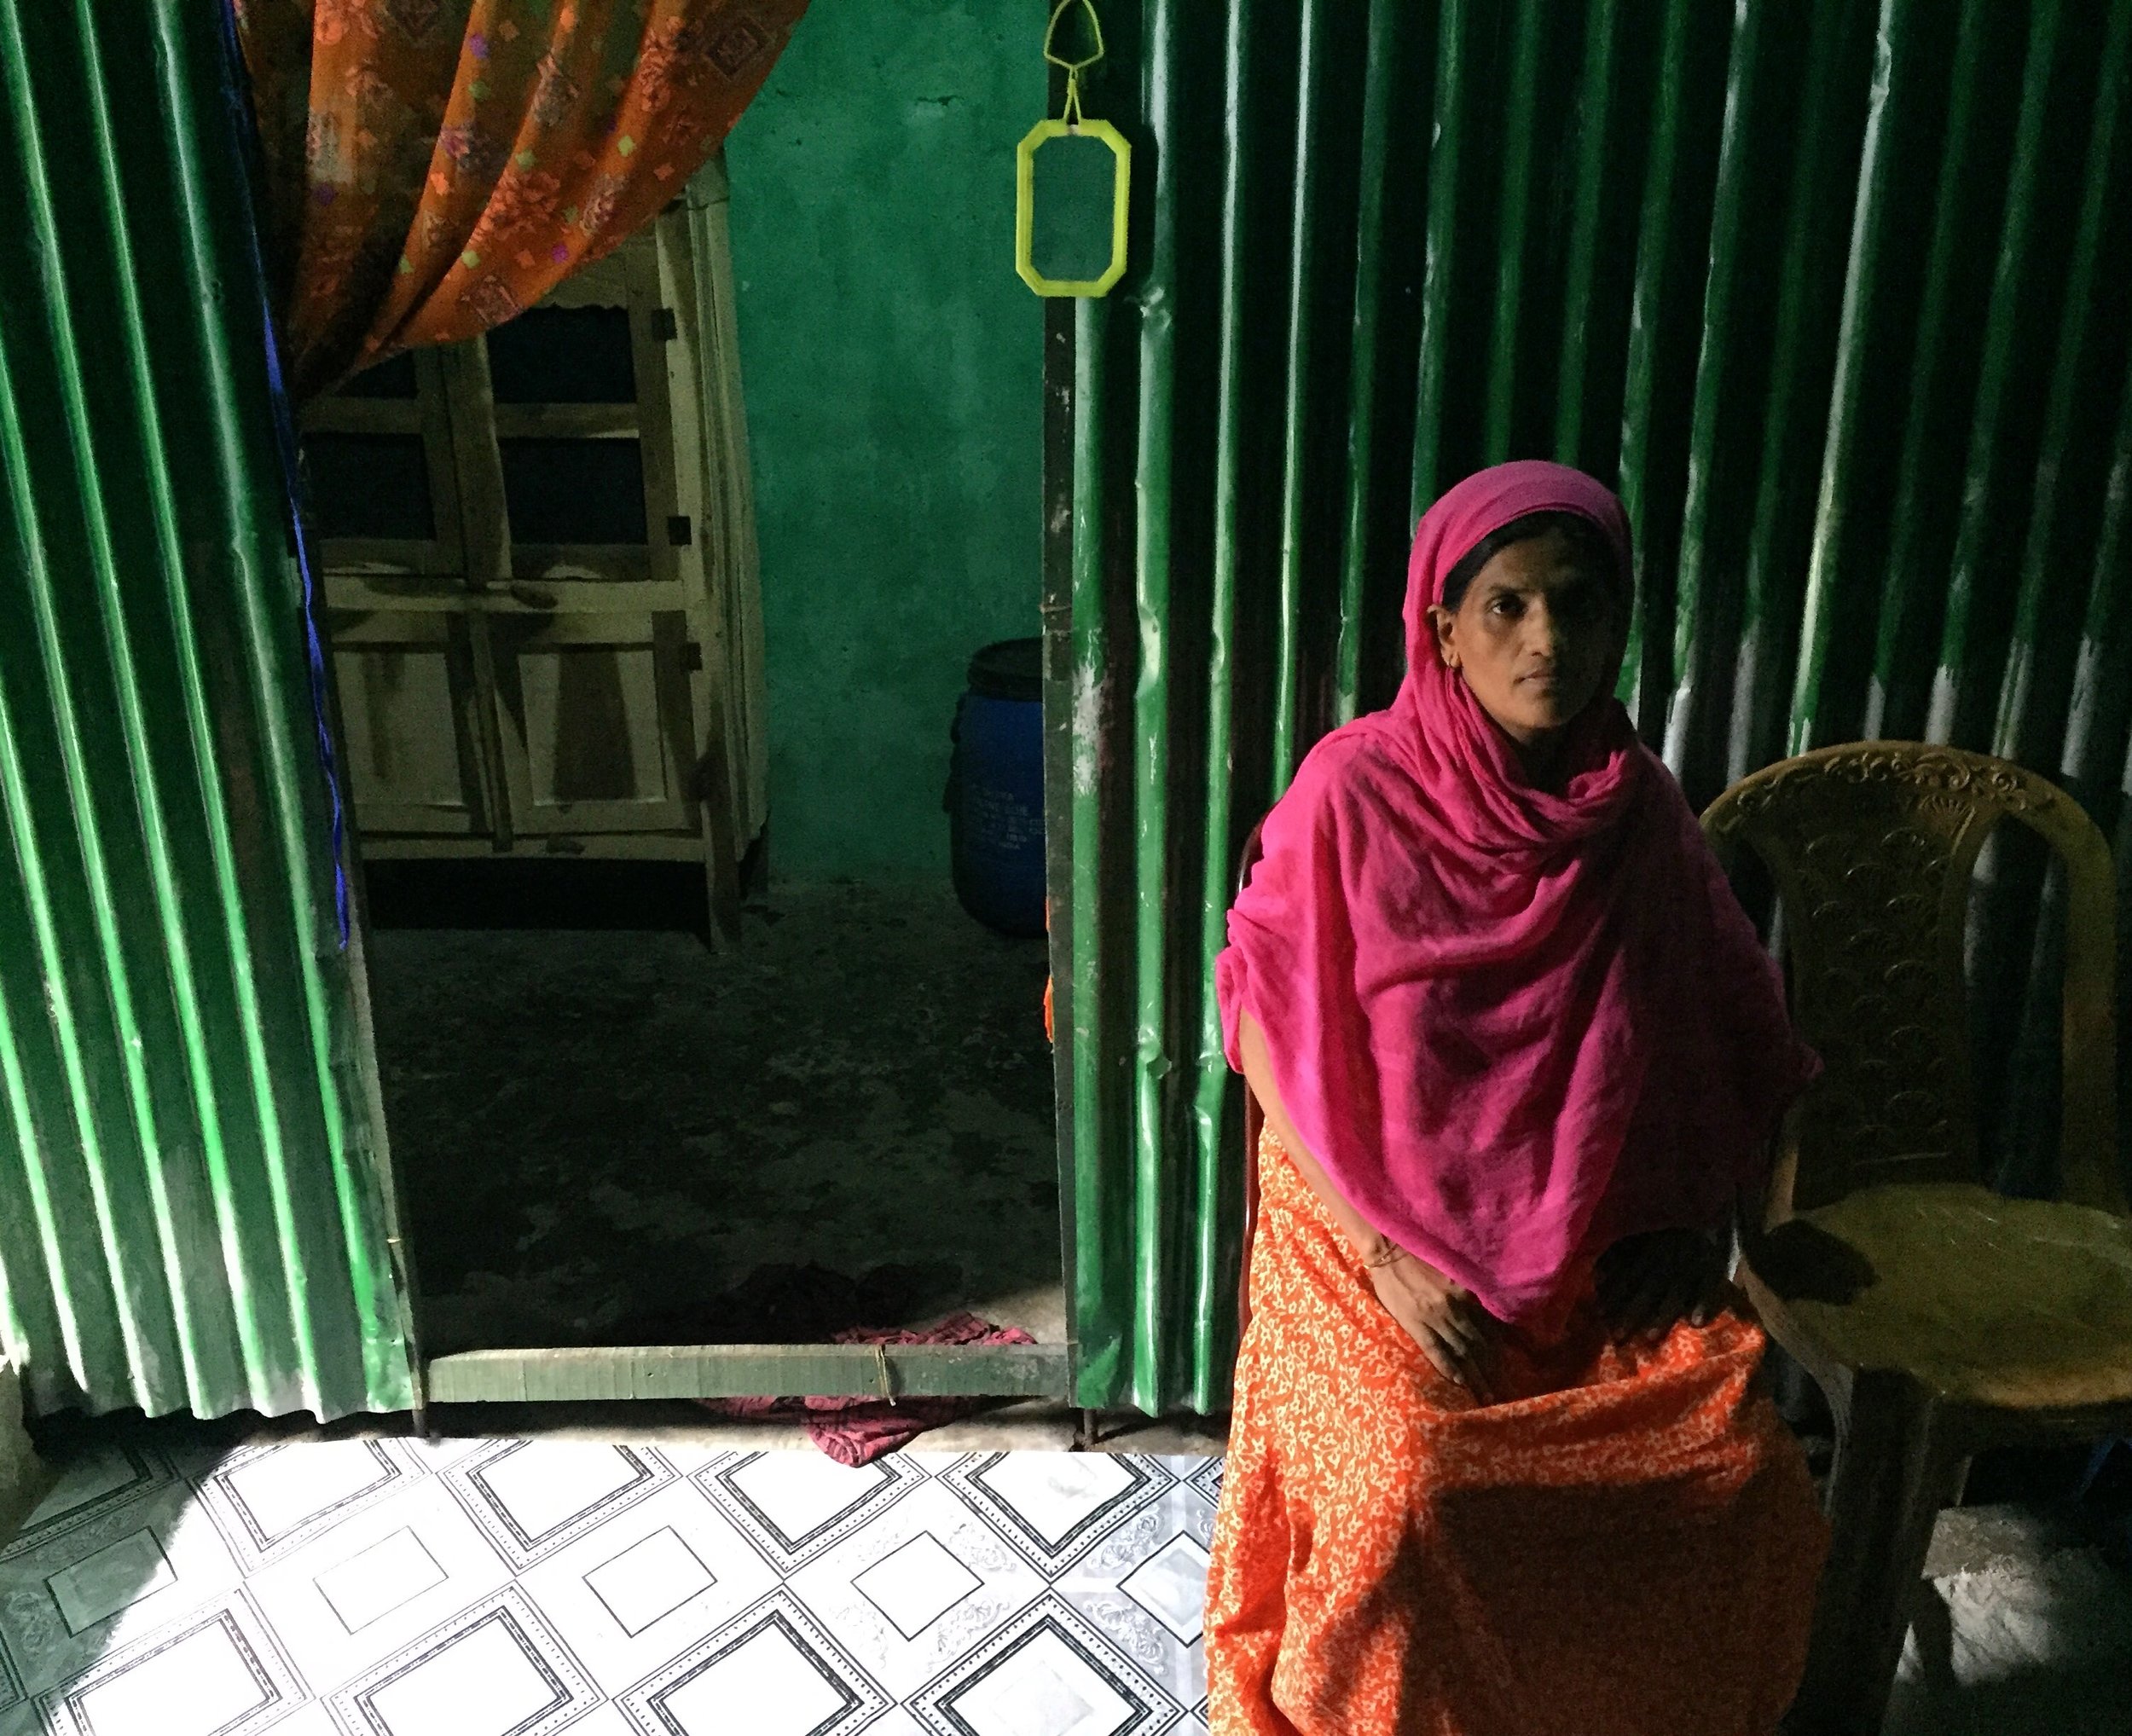  NARSHINGDI | Alia lives the district of Narshingdi, in central Bangladesh. When a cousin encouraged her to work in Lebanon as a domestic worker she jumped at the opportunity. Women in her town have little choice in terms of jobs; most work in garmen